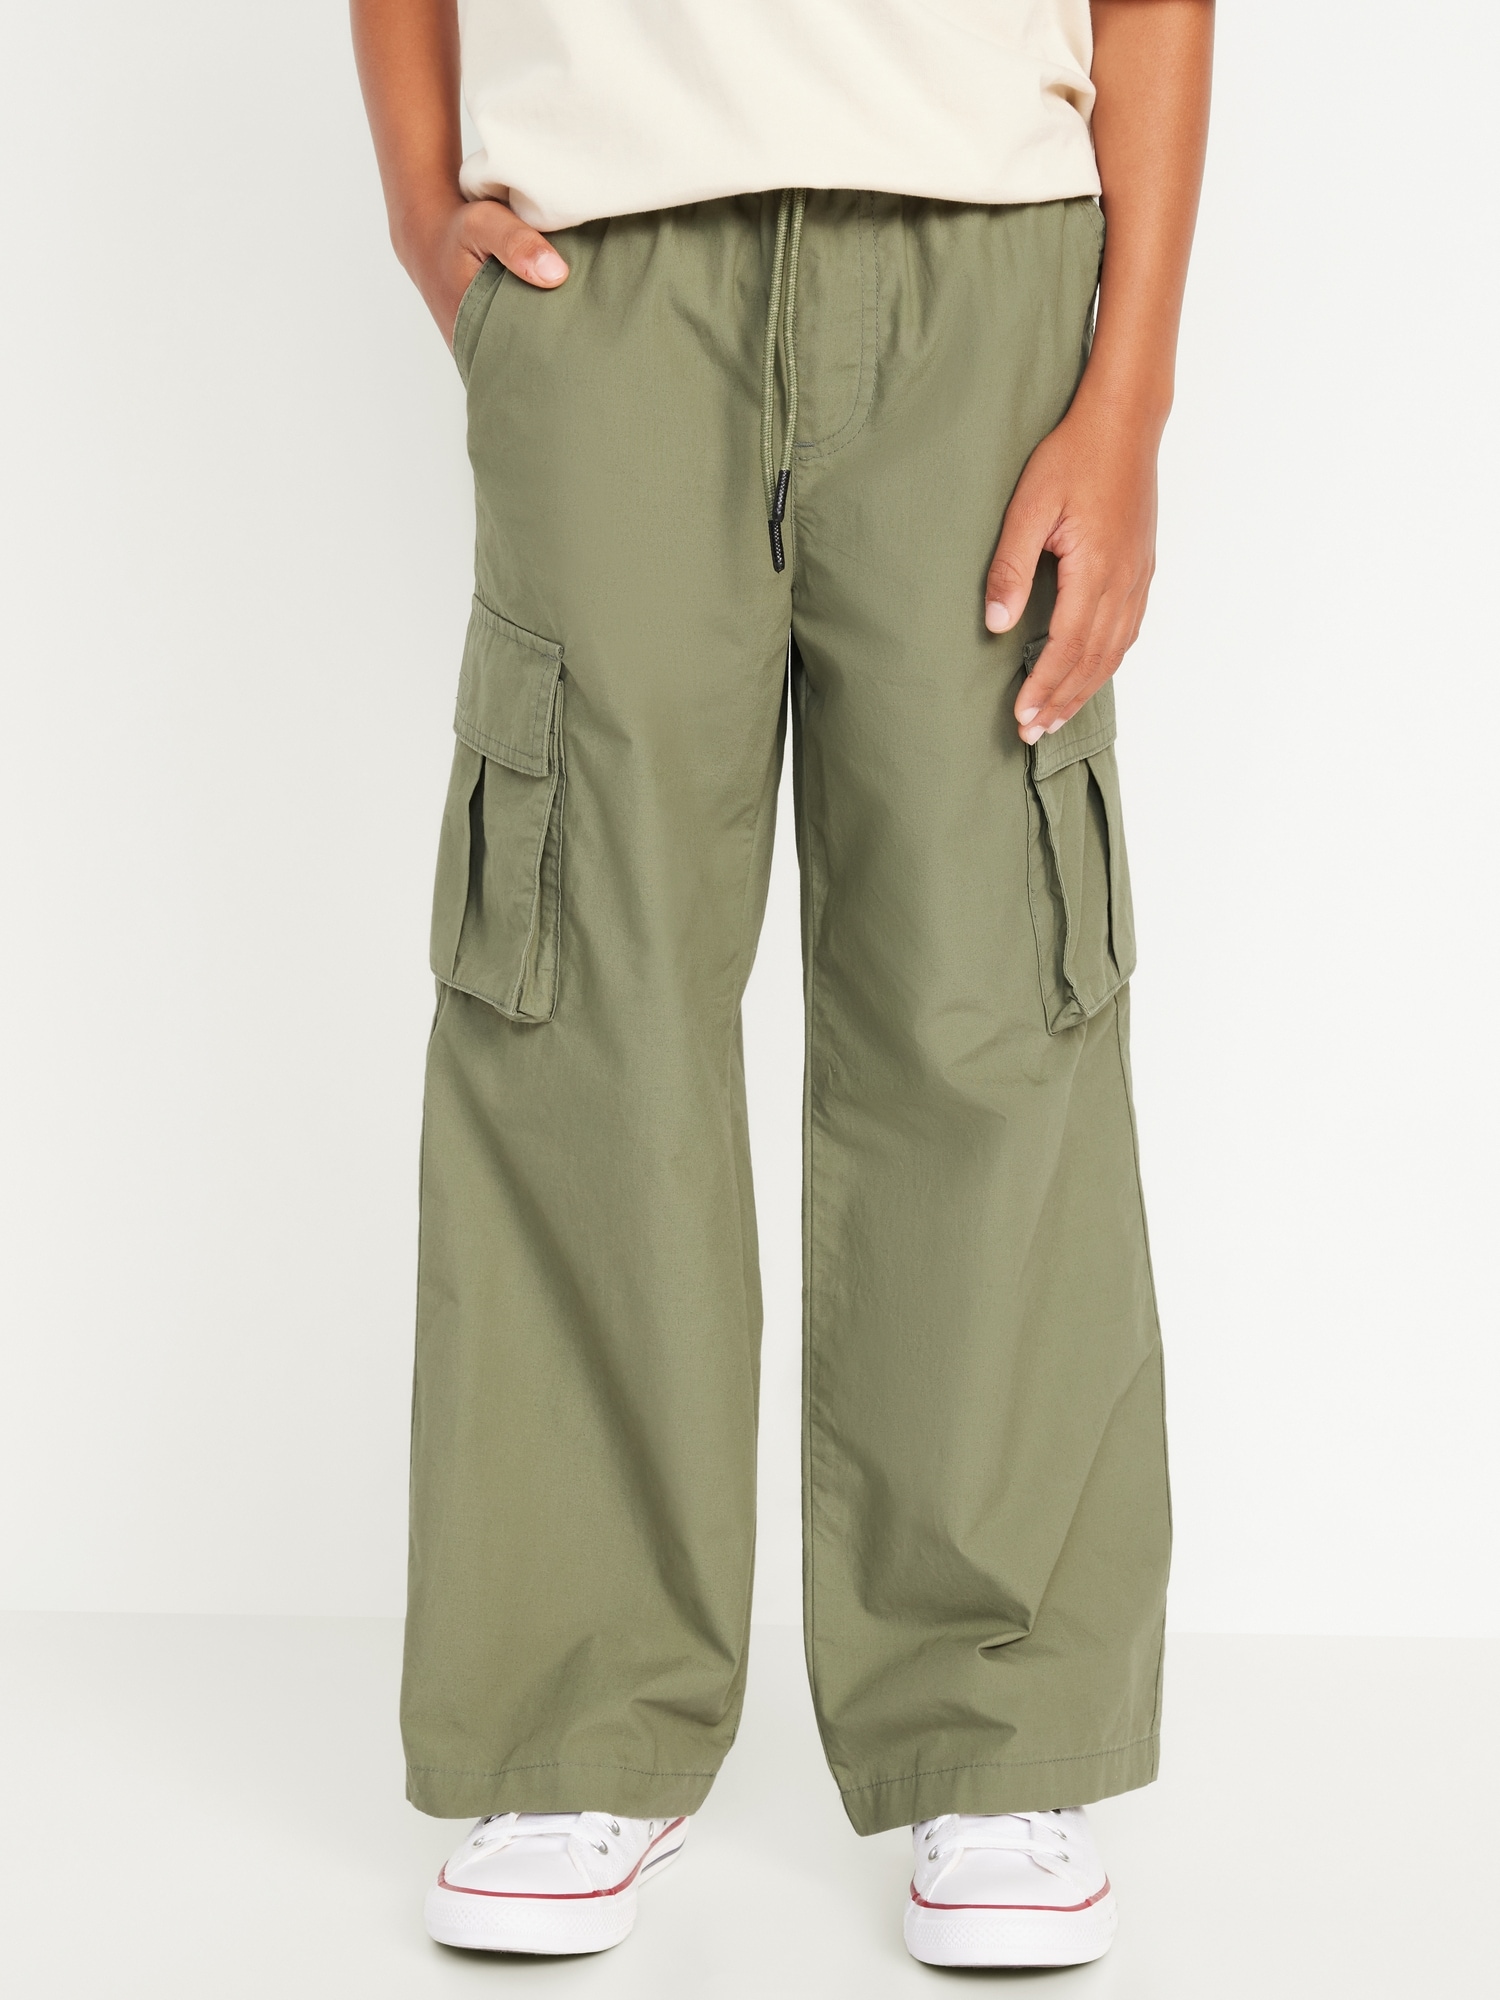 Pants for Kids, Cargos, Chinos & More